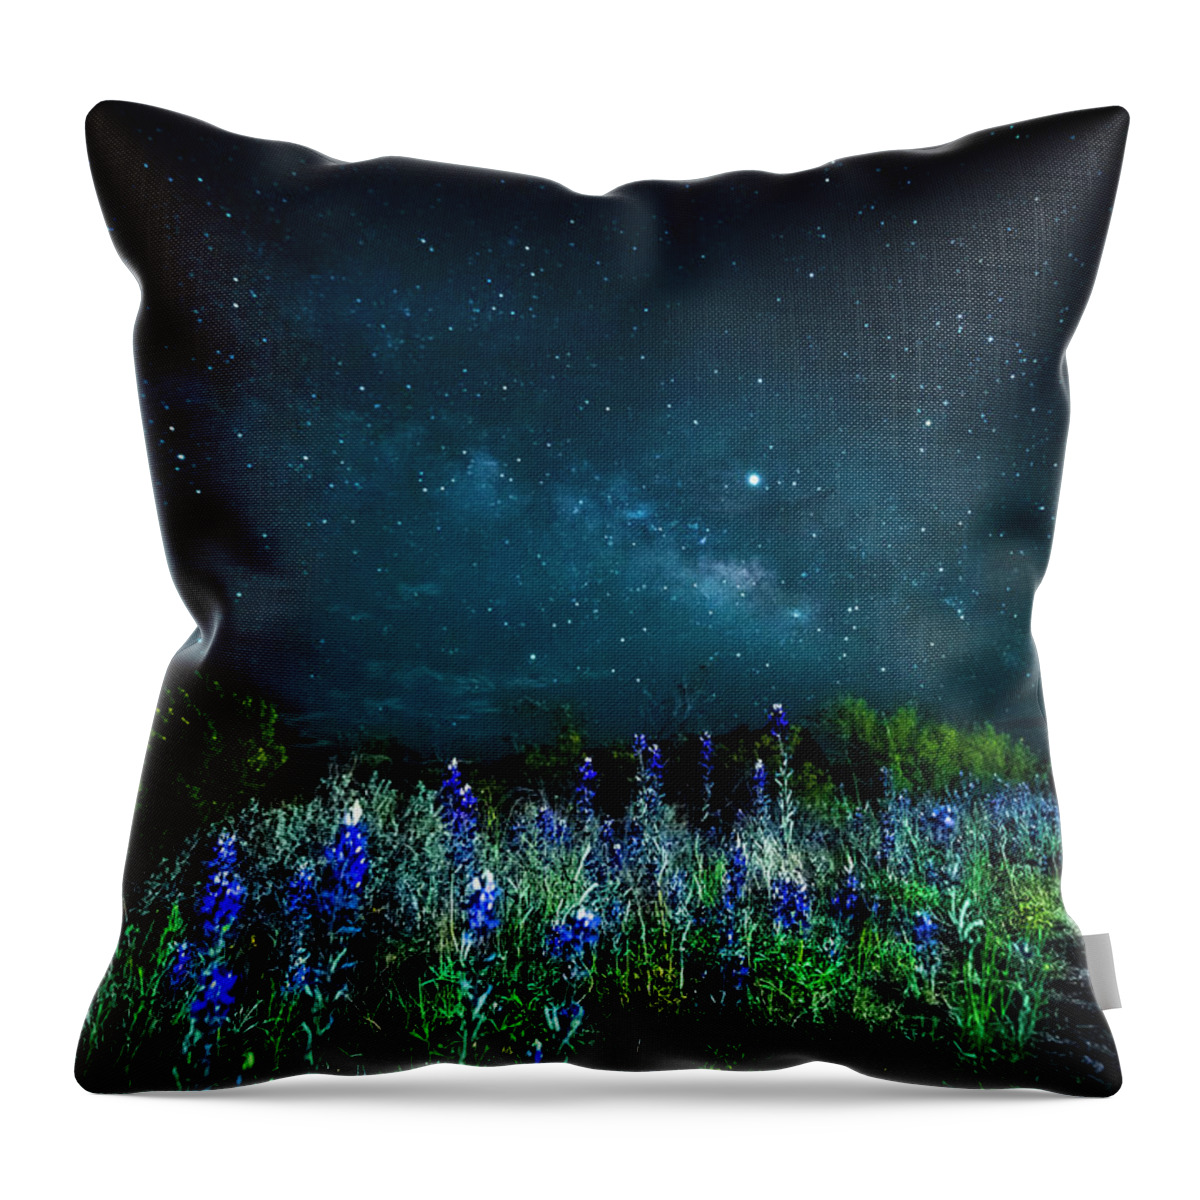 Big Bend Throw Pillow featuring the photograph Galactic Bluebonnets by David Morefield